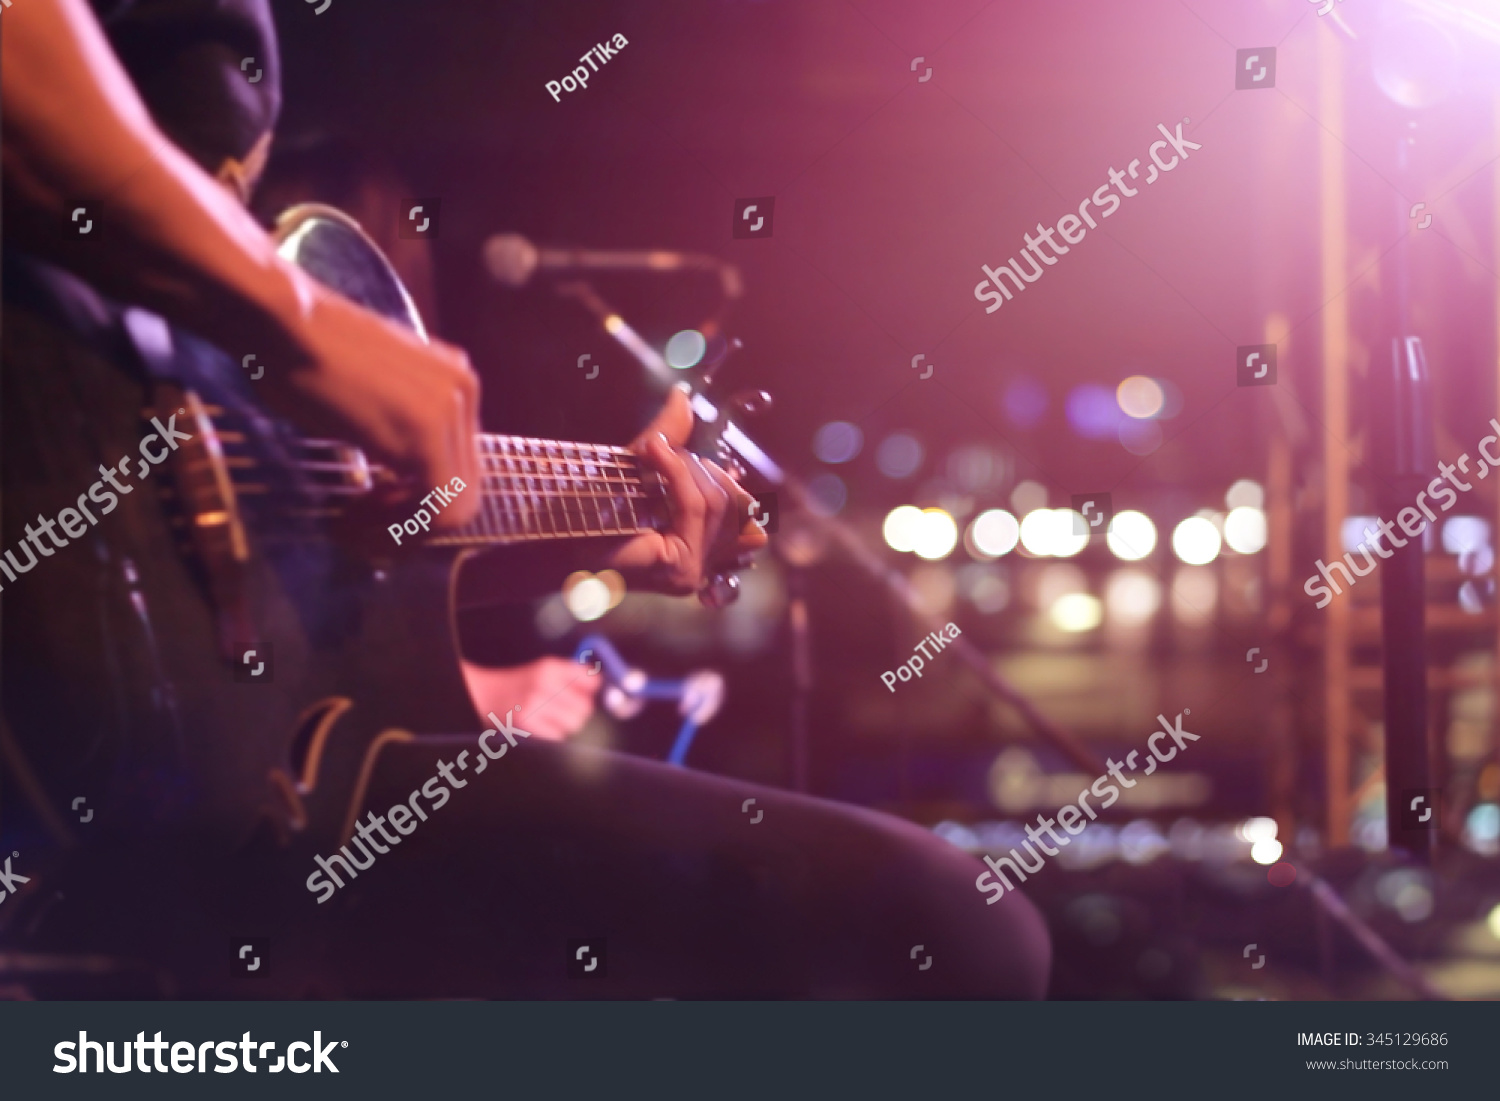 Guitarist on stage for background, soft and blur concept #345129686